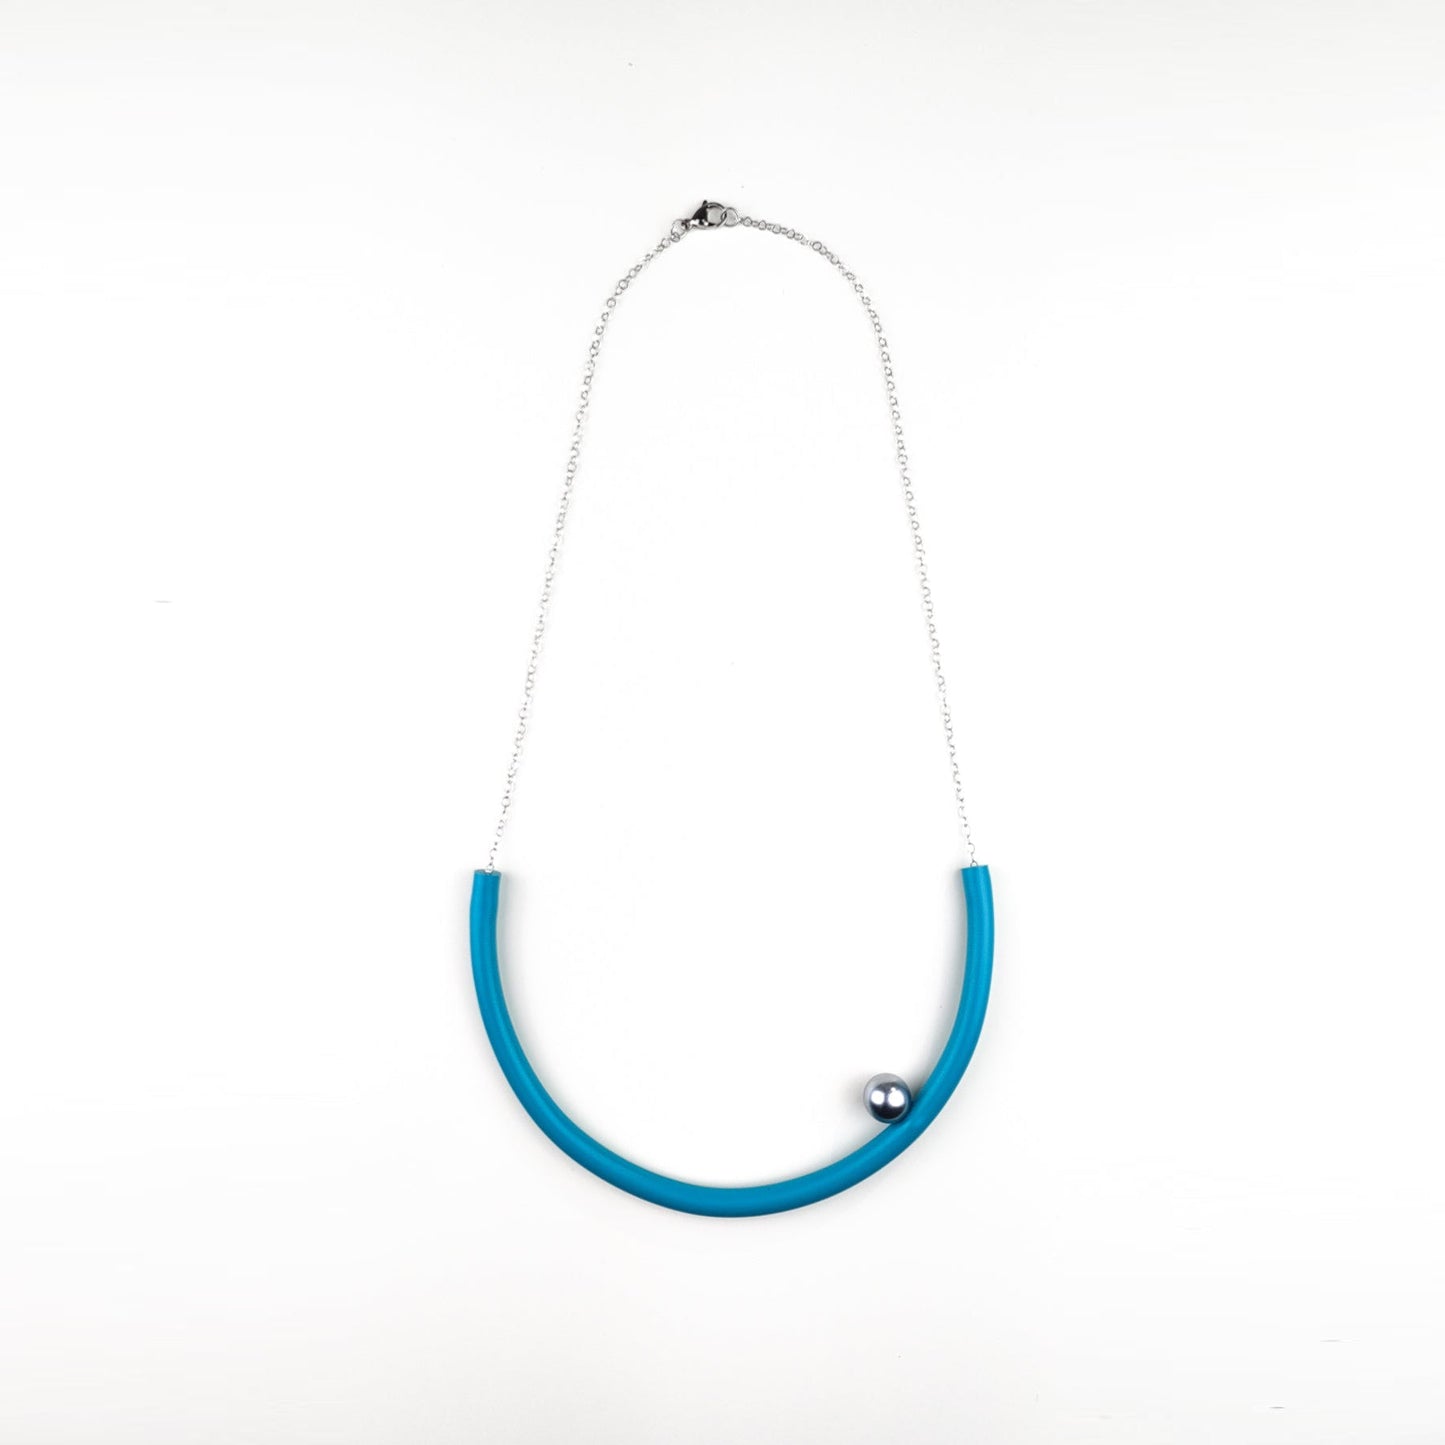 BILICO round necklace - teal color / light brown pearl